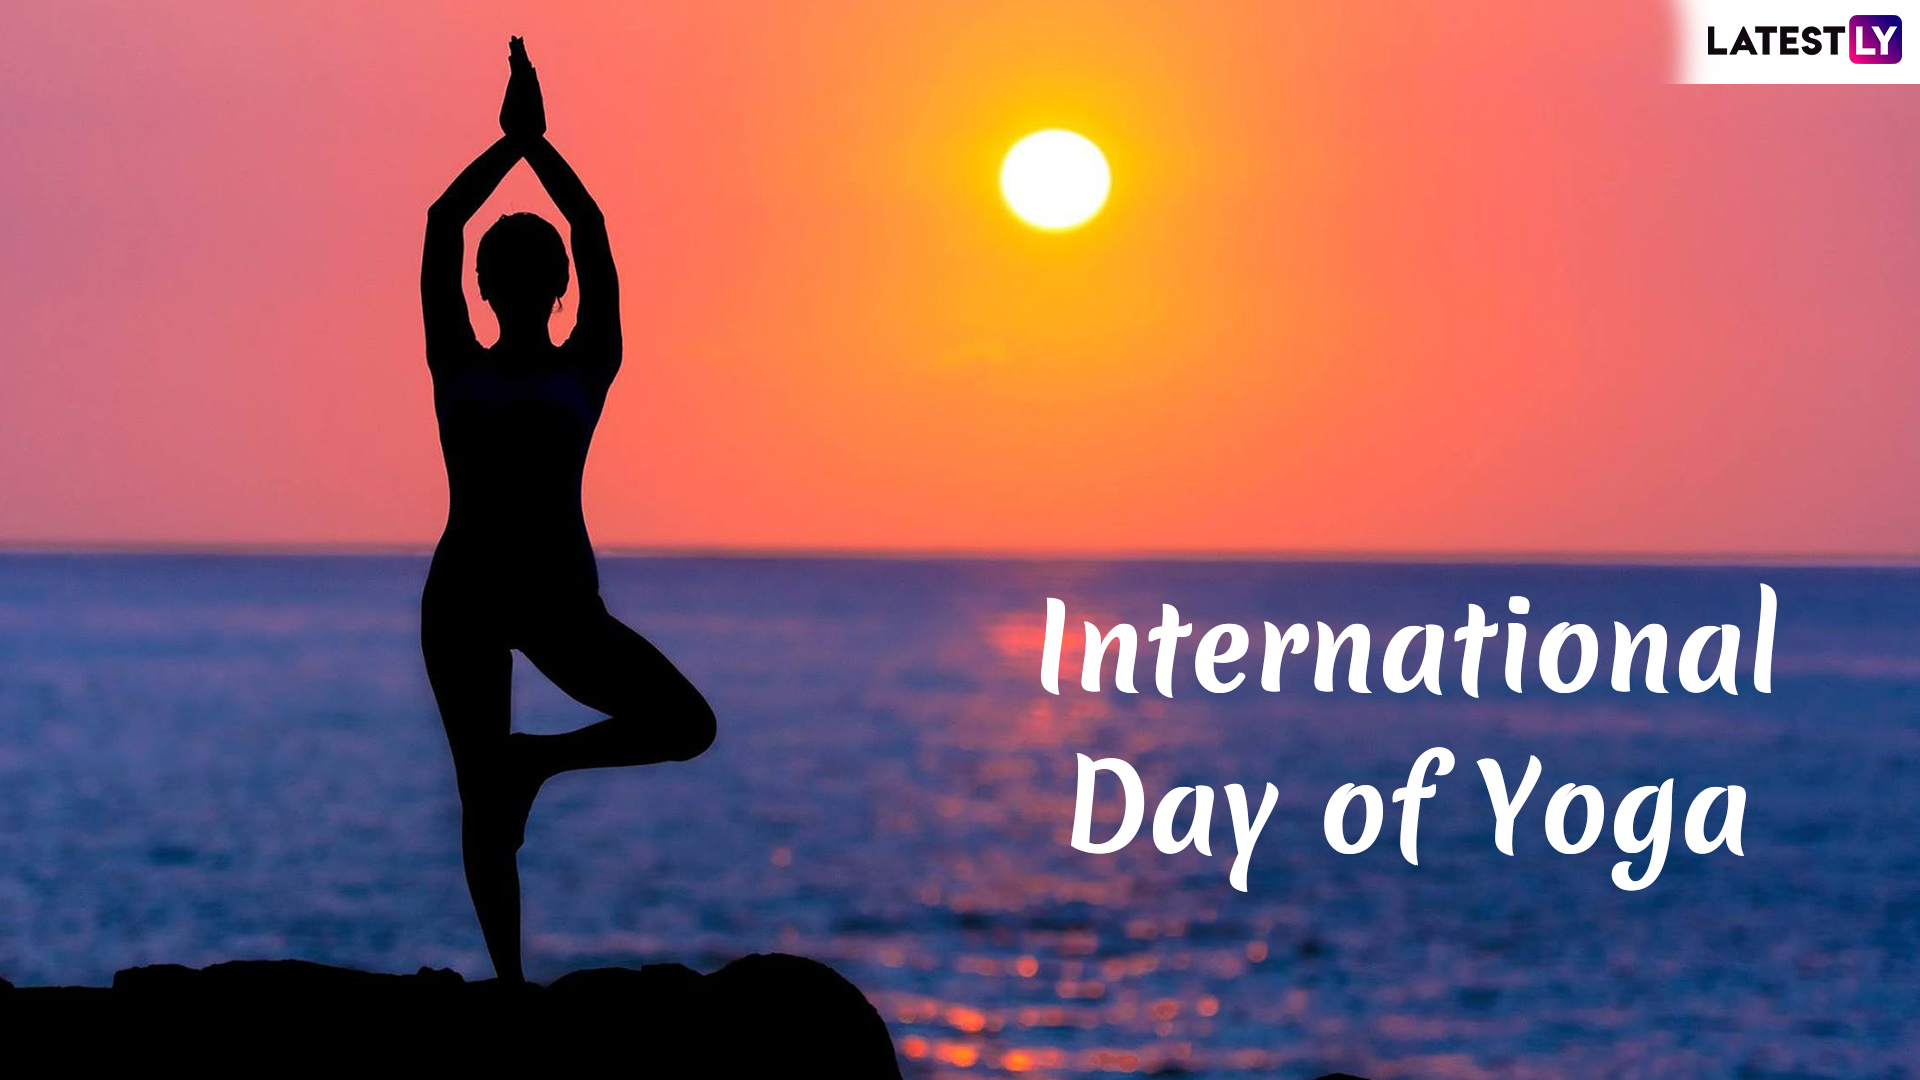 international yoga day 2019 images hd wallpapers with quotes for free download online wish happy yoga day with gif greetings whatsapp stickers latestly international yoga day 2019 images hd